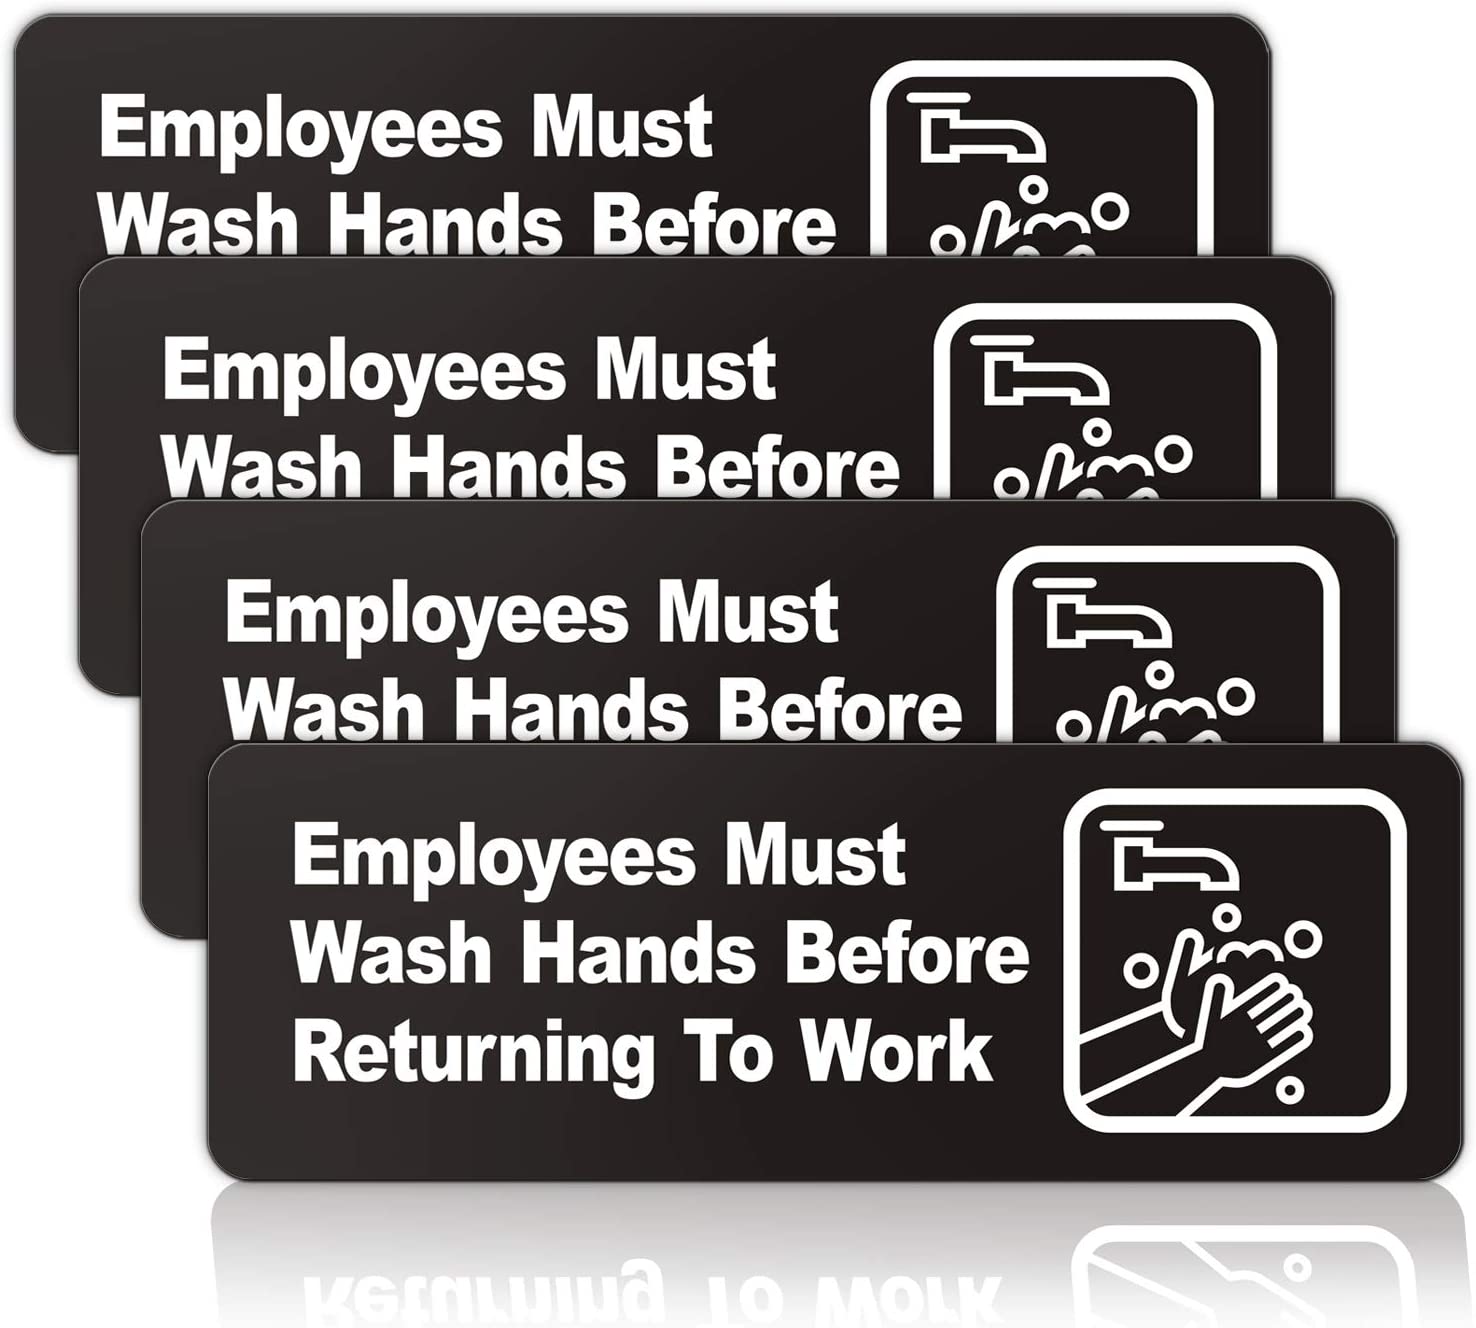 Employees Must Wash Hands Before Returning to Work Sign, (4 Pack) 9 x 3 Inch Acrylic Plastic Sign with Symbols, Self-adhesive, for Restaurant, Salons, Hotel, Motel, Rest Stops, Public Restrooms